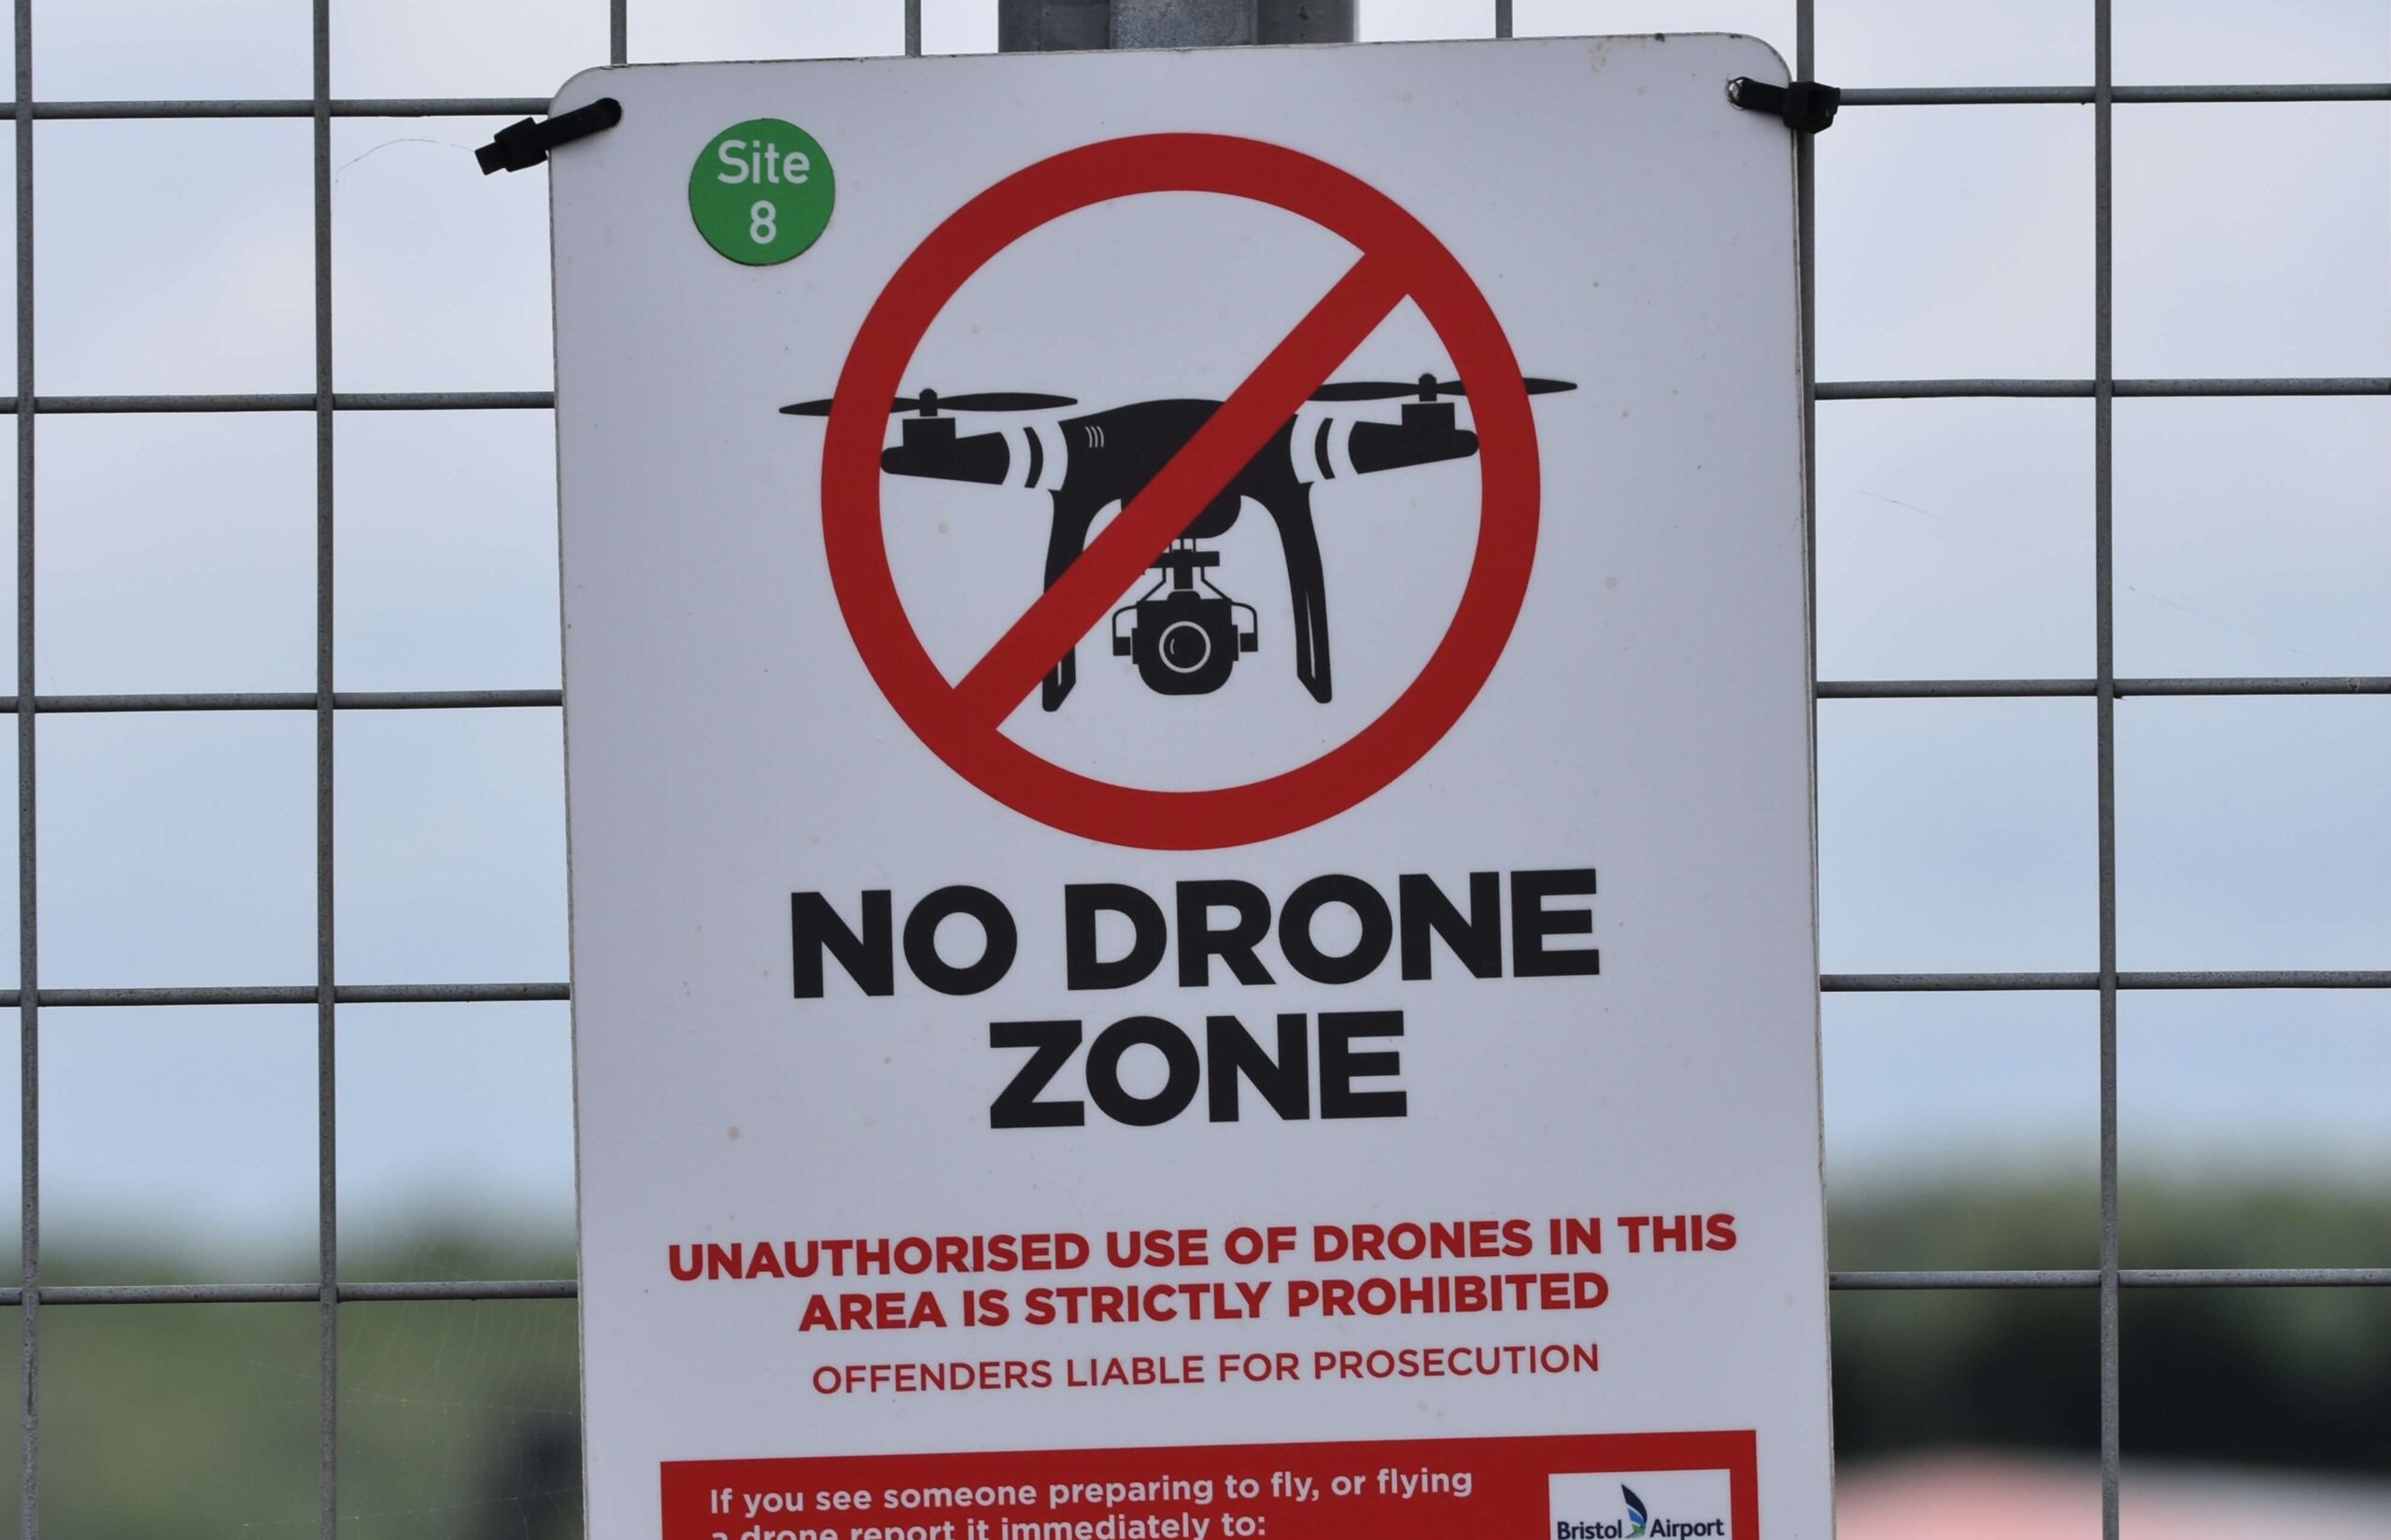 Drone Geofencing: How Does It Work?